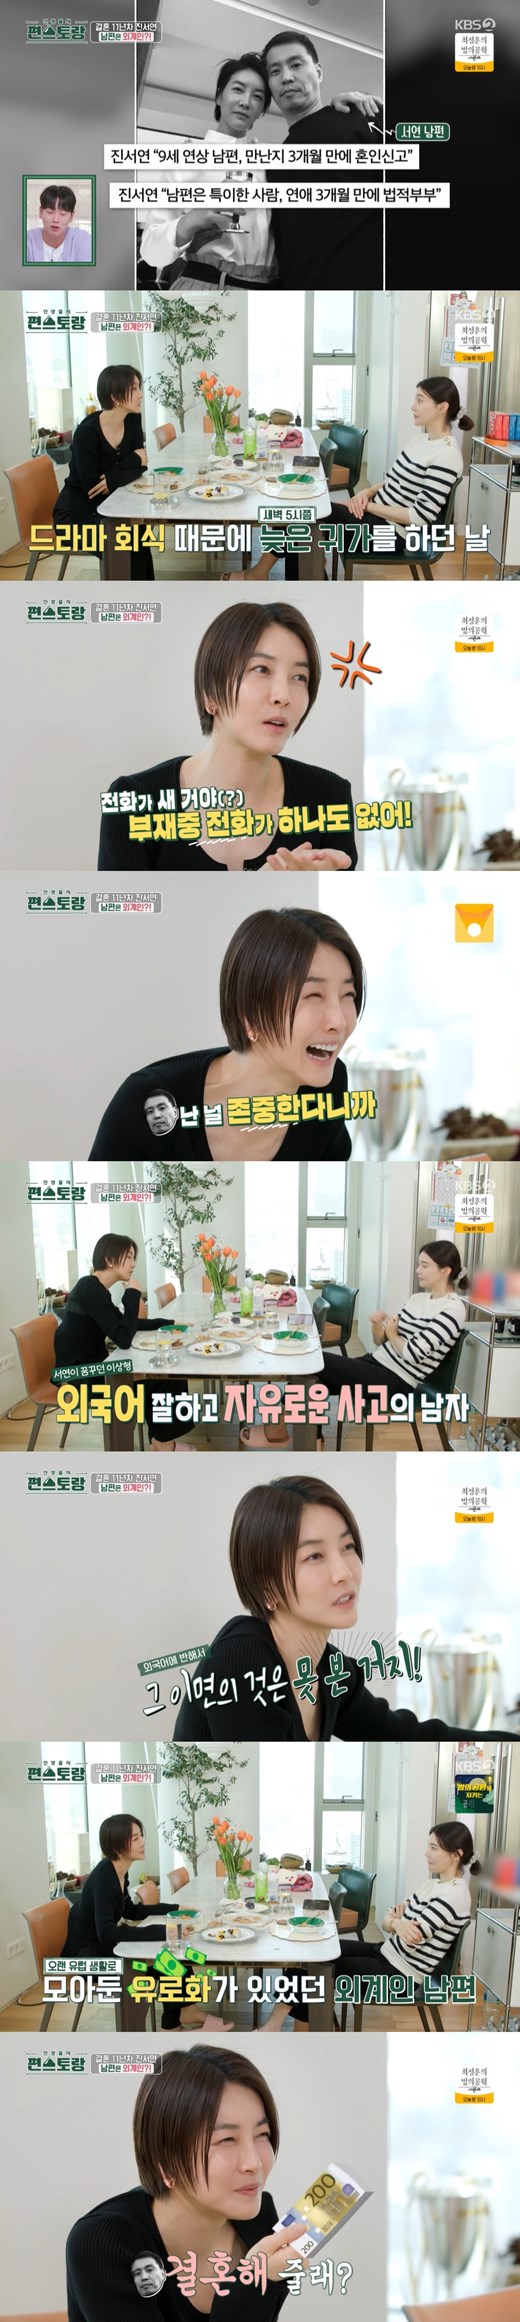 Actress Jin Seo-yeon mentioned Husband.On the 23rd KBS 2TV Stars Top Recipe at Fun-Staurant, actress Jin Seo-yeon appeared in Cha Ye-ryun and drama Happy Battle.On this day, Jin Seo-yeon brought out the story of a 9-year-old Husband who married after three months of dating.Jin Seo-yeon said, Our Husband is an independent human being. I did not go home until 5 am because of the drama dinner.Of course, I was late, so I thought I had a lot of missed Telephones, but I did not have any Telephones in my absence. So I tried Telephone and it did not work.I was so excited, he said. When I was on the second Telephone, I was in a deep sleep. Its 5 oclock in the morning. I do not have a Telephone!I said, Theyre all adults in social life, and I respect you. I was so angry that I said, I like pecking. Give me a phone. Give me some obsession. Im busy.I keep talking to Telephone and then I do not respect people who are with me. Jin Seo-yeon said, I met at a cafe. I do not know if its a setting, but I was talking in French from the moment I came in. I did not know my brothers identity.My ideal type, who I always dreamed of, was a smart man with a good foreign language and free thinking. I didnt see what was behind it. I didnt see it as an alien. Im free, but Im too free.Jin Seo-yeon also said behind the proposal, I lived in Paris for a long time and took the euros that I had collected and said, Will you marry me?Ive been with Husband for 11 years. Usually, if you live long enough, you dont like it even if you breathe. I like to feel the energy of Husband passing by. Its like a cartoon character just by looking at him sleeping.I act like Im in a comic book, he said, expressing his love for Husband.Cha Ye-ryun said, Youre so cheerful. Every time you say a word, my sister bursts out.In the story of Jin Seo-yeon, Lee Chan-won said, It seems to be a real ideal marriage.